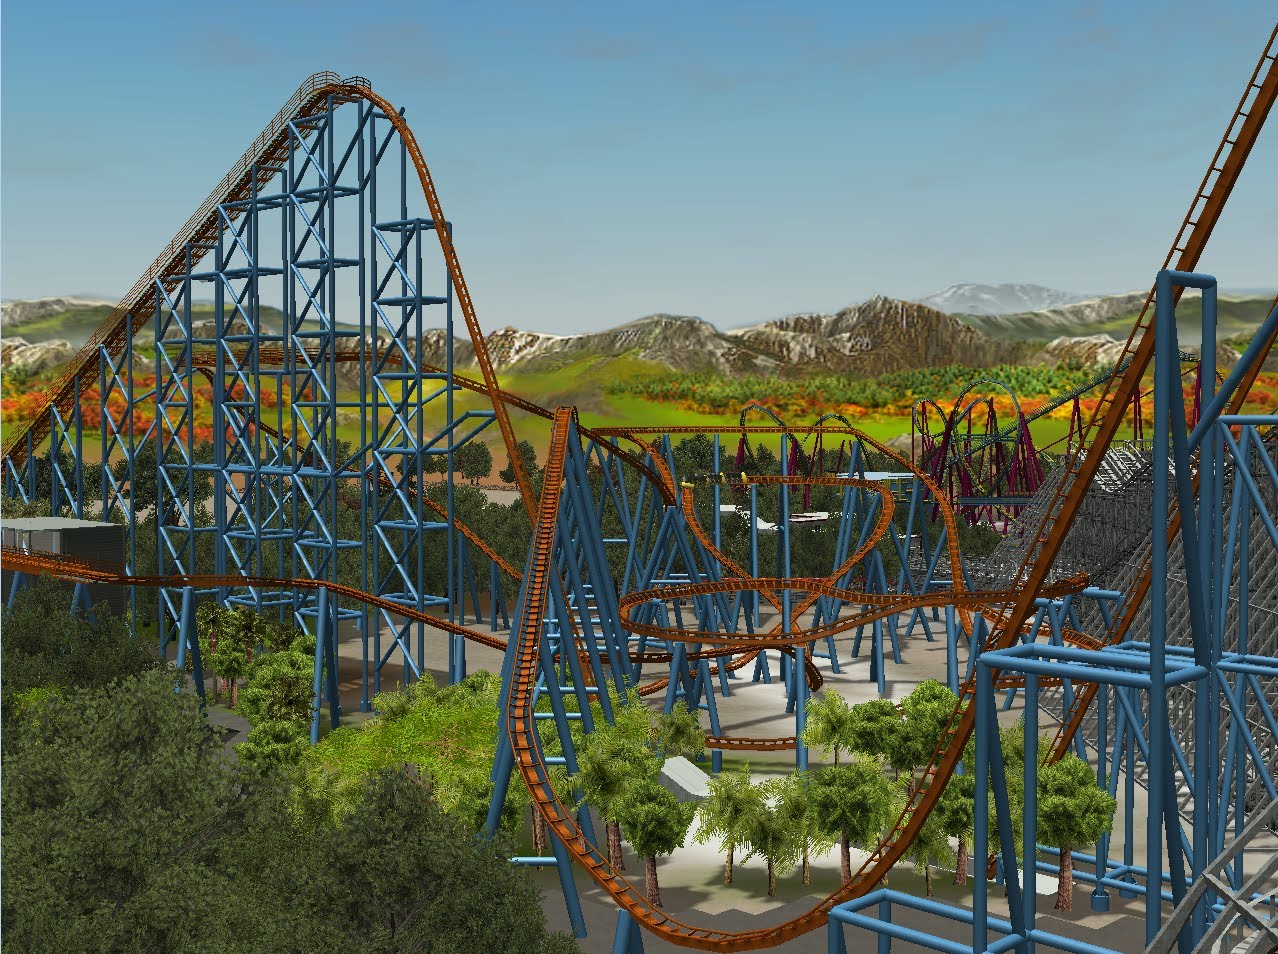 Frontier developed RCT3.